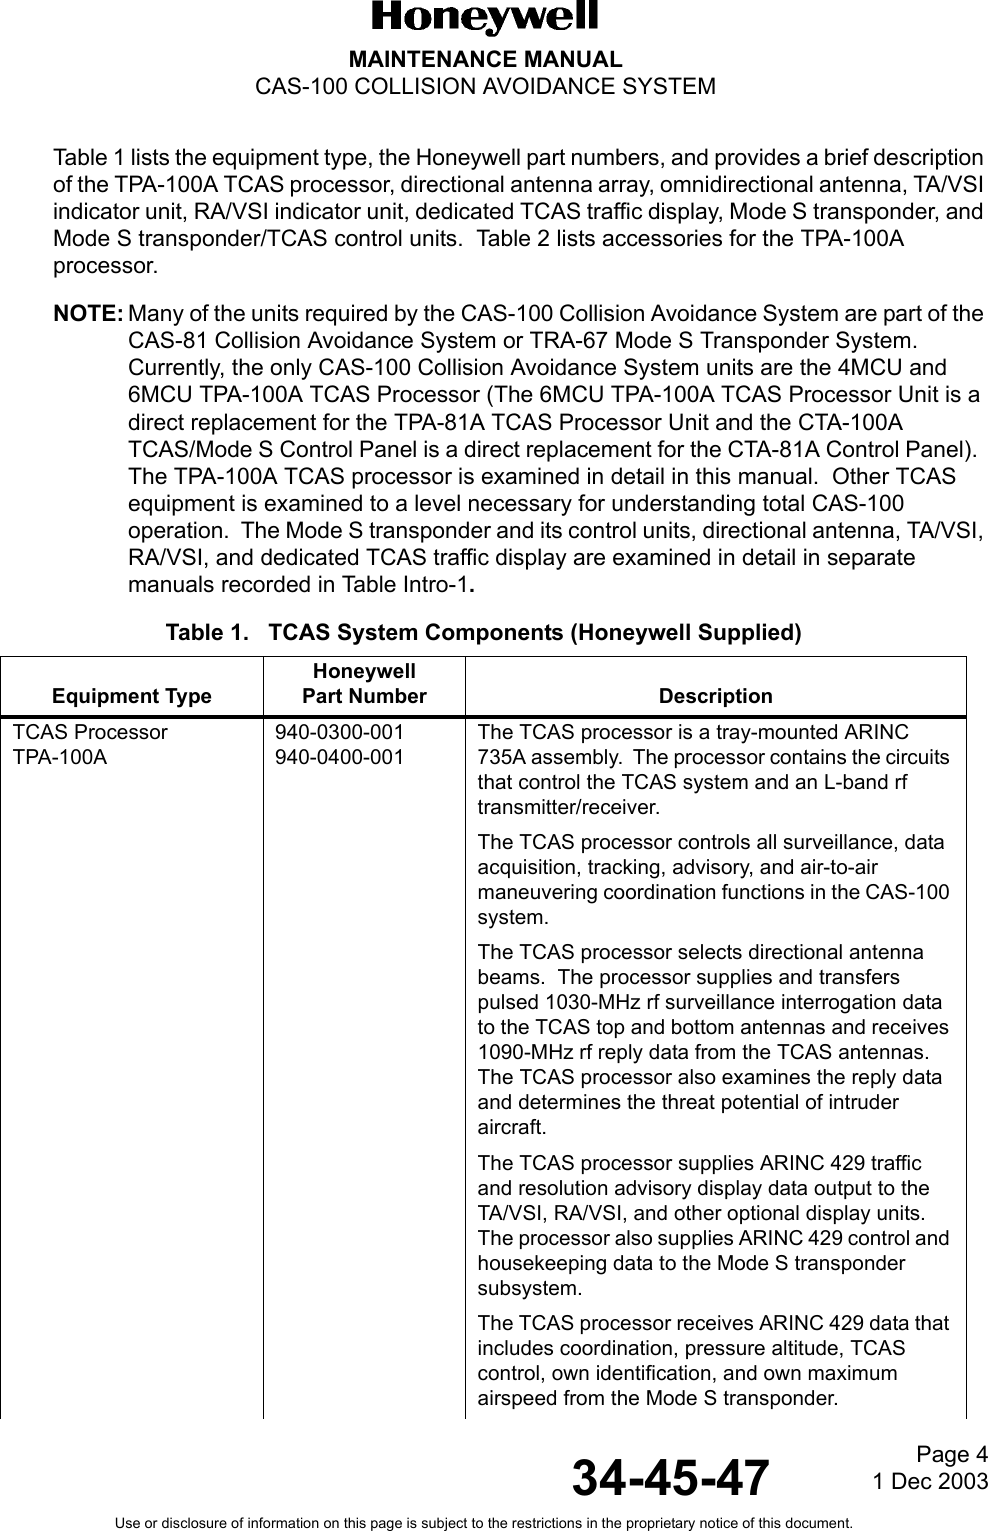 Page 41 Dec 200334-45-47MAINTENANCE MANUALCAS-100 COLLISION AVOIDANCE SYSTEMUse or disclosure of information on this page is subject to the restrictions in the proprietary notice of this document.Table 1 lists the equipment type, the Honeywell part numbers, and provides a brief description of the TPA-100A TCAS processor, directional antenna array, omnidirectional antenna, TA/VSI indicator unit, RA/VSI indicator unit, dedicated TCAS traffic display, Mode S transponder, and Mode S transponder/TCAS control units.  Table 2 lists accessories for the TPA-100A processor.NOTE: Many of the units required by the CAS-100 Collision Avoidance System are part of the CAS-81 Collision Avoidance System or TRA-67 Mode S Transponder System.  Currently, the only CAS-100 Collision Avoidance System units are the 4MCU and 6MCU TPA-100A TCAS Processor (The 6MCU TPA-100A TCAS Processor Unit is a direct replacement for the TPA-81A TCAS Processor Unit and the CTA-100A TCAS/Mode S Control Panel is a direct replacement for the CTA-81A Control Panel).  The TPA-100A TCAS processor is examined in detail in this manual.  Other TCAS equipment is examined to a level necessary for understanding total CAS-100 operation.  The Mode S transponder and its control units, directional antenna, TA/VSI, RA/VSI, and dedicated TCAS traffic display are examined in detail in separate manuals recorded in Table Intro-1.Table 1.   TCAS System Components (Honeywell Supplied)Equipment TypeHoneywellPart Number DescriptionTCAS Processor TPA-100A940-0300-001940-0400-001The TCAS processor is a tray-mounted ARINC 735A assembly.  The processor contains the circuits that control the TCAS system and an L-band rf transmitter/receiver.The TCAS processor controls all surveillance, data acquisition, tracking, advisory, and air-to-air maneuvering coordination functions in the CAS-100 system.The TCAS processor selects directional antenna beams.  The processor supplies and transfers pulsed 1030-MHz rf surveillance interrogation data to the TCAS top and bottom antennas and receives 1090-MHz rf reply data from the TCAS antennas.  The TCAS processor also examines the reply data and determines the threat potential of intruder aircraft.The TCAS processor supplies ARINC 429 traffic and resolution advisory display data output to the TA/VSI, RA/VSI, and other optional display units.  The processor also supplies ARINC 429 control and housekeeping data to the Mode S transponder subsystem.The TCAS processor receives ARINC 429 data that includes coordination, pressure altitude, TCAS control, own identification, and own maximum airspeed from the Mode S transponder.